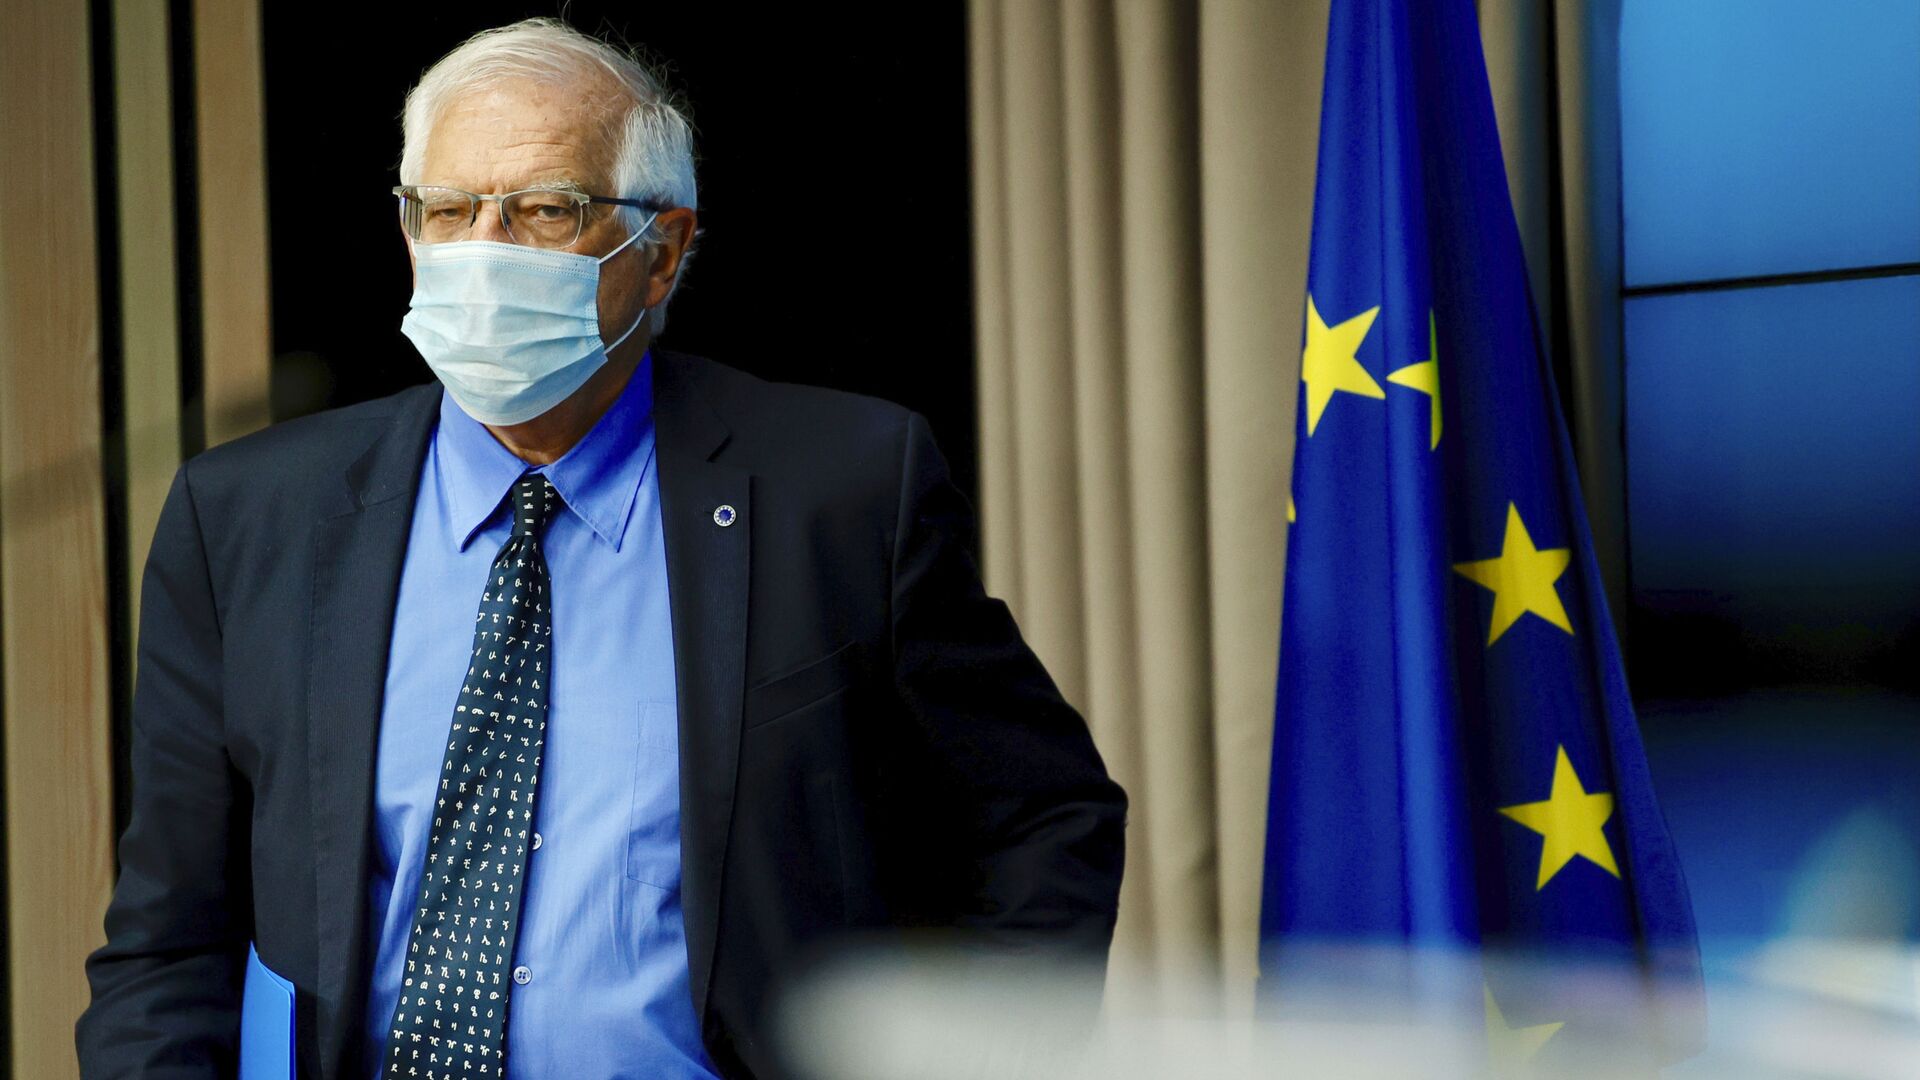 European Union foreign policy chief Josep Borrell arrives for a media conference after a meeting of EU foreign ministers at the European Council building in Brussels, Monday, May 10, 2021. - Sputnik International, 1920, 08.10.2021